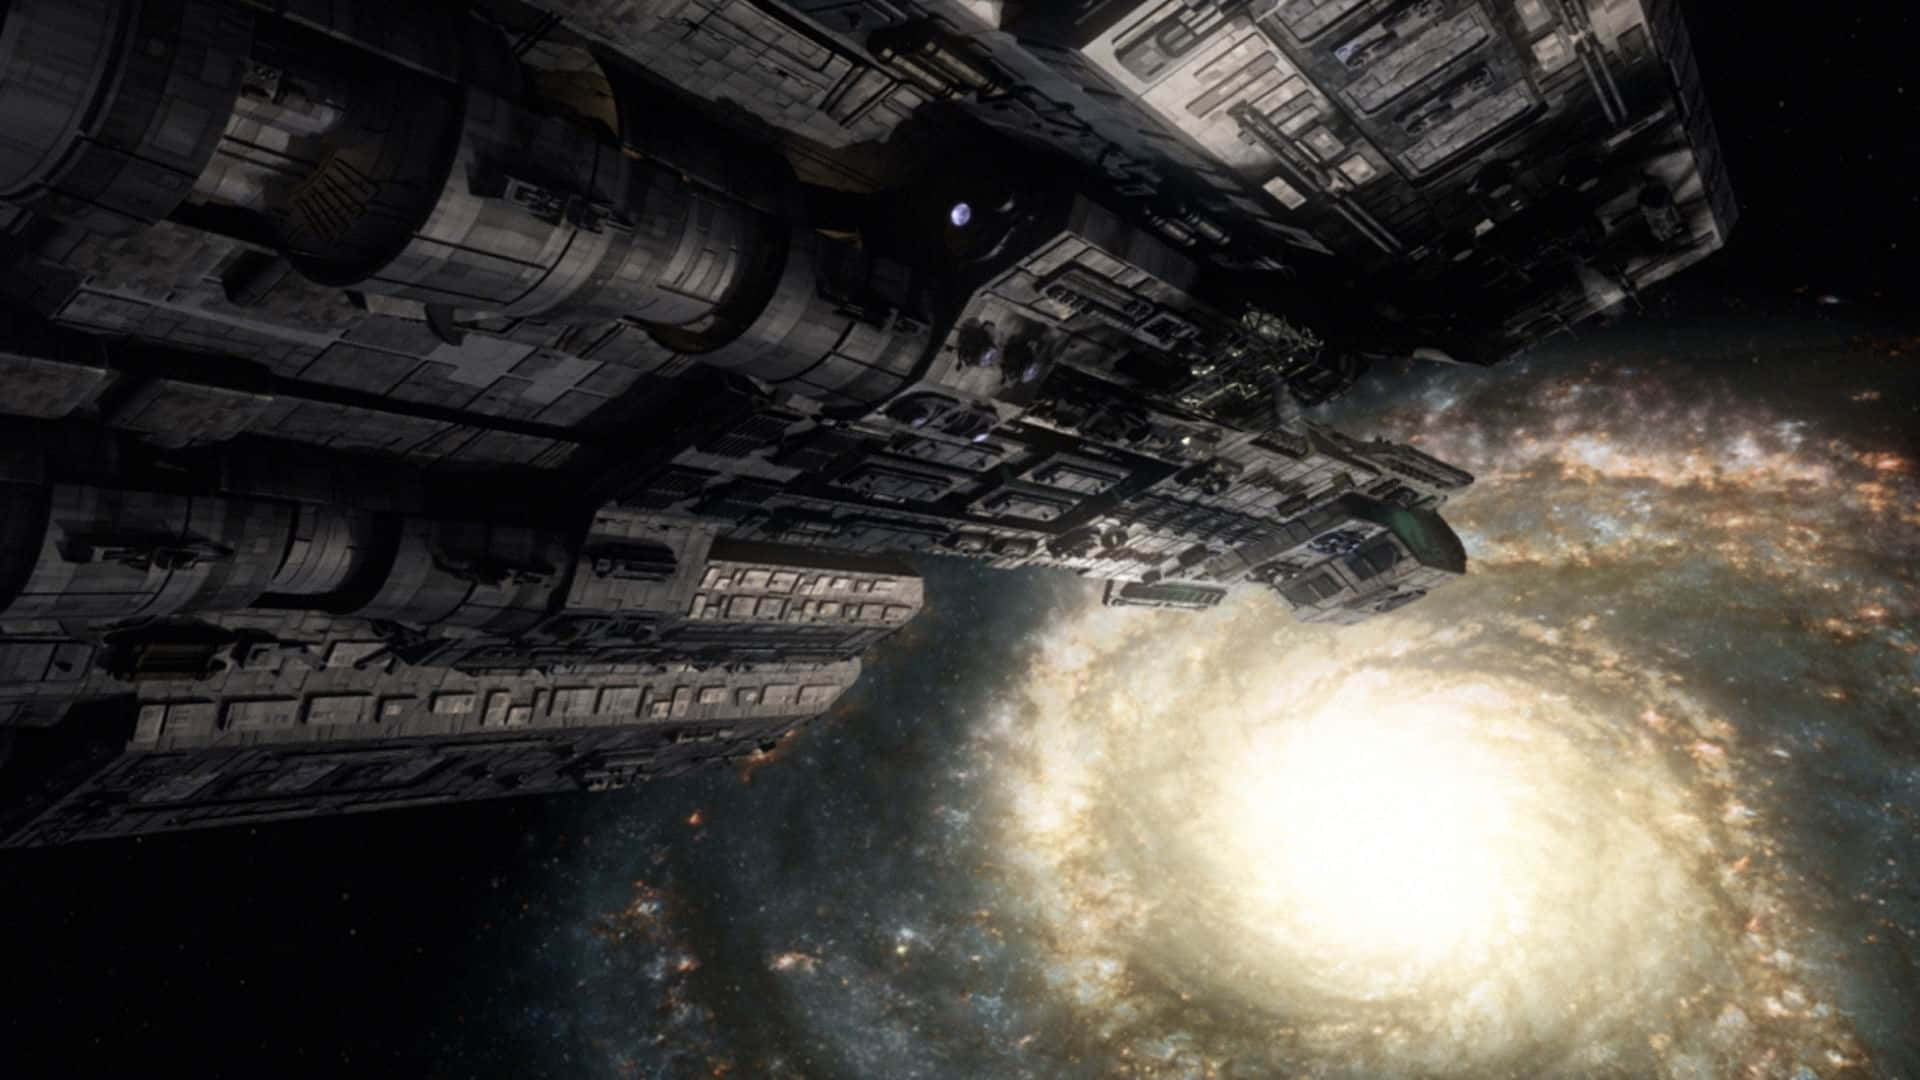 Experience the wonder of traversing the Universe with Stargate Wallpaper